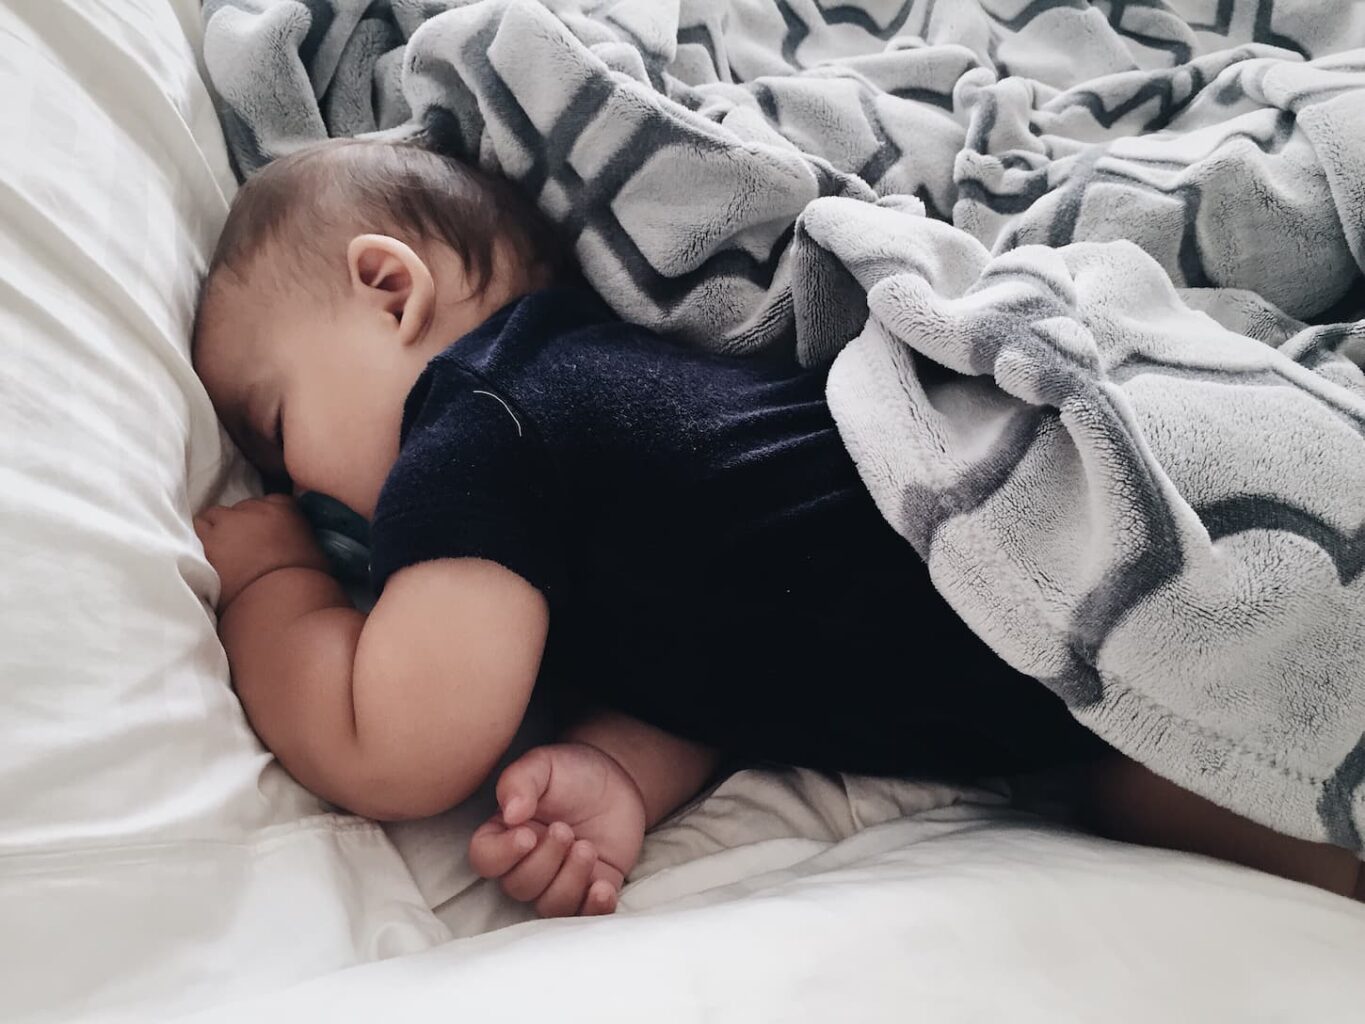 An image of a baby sleeping.